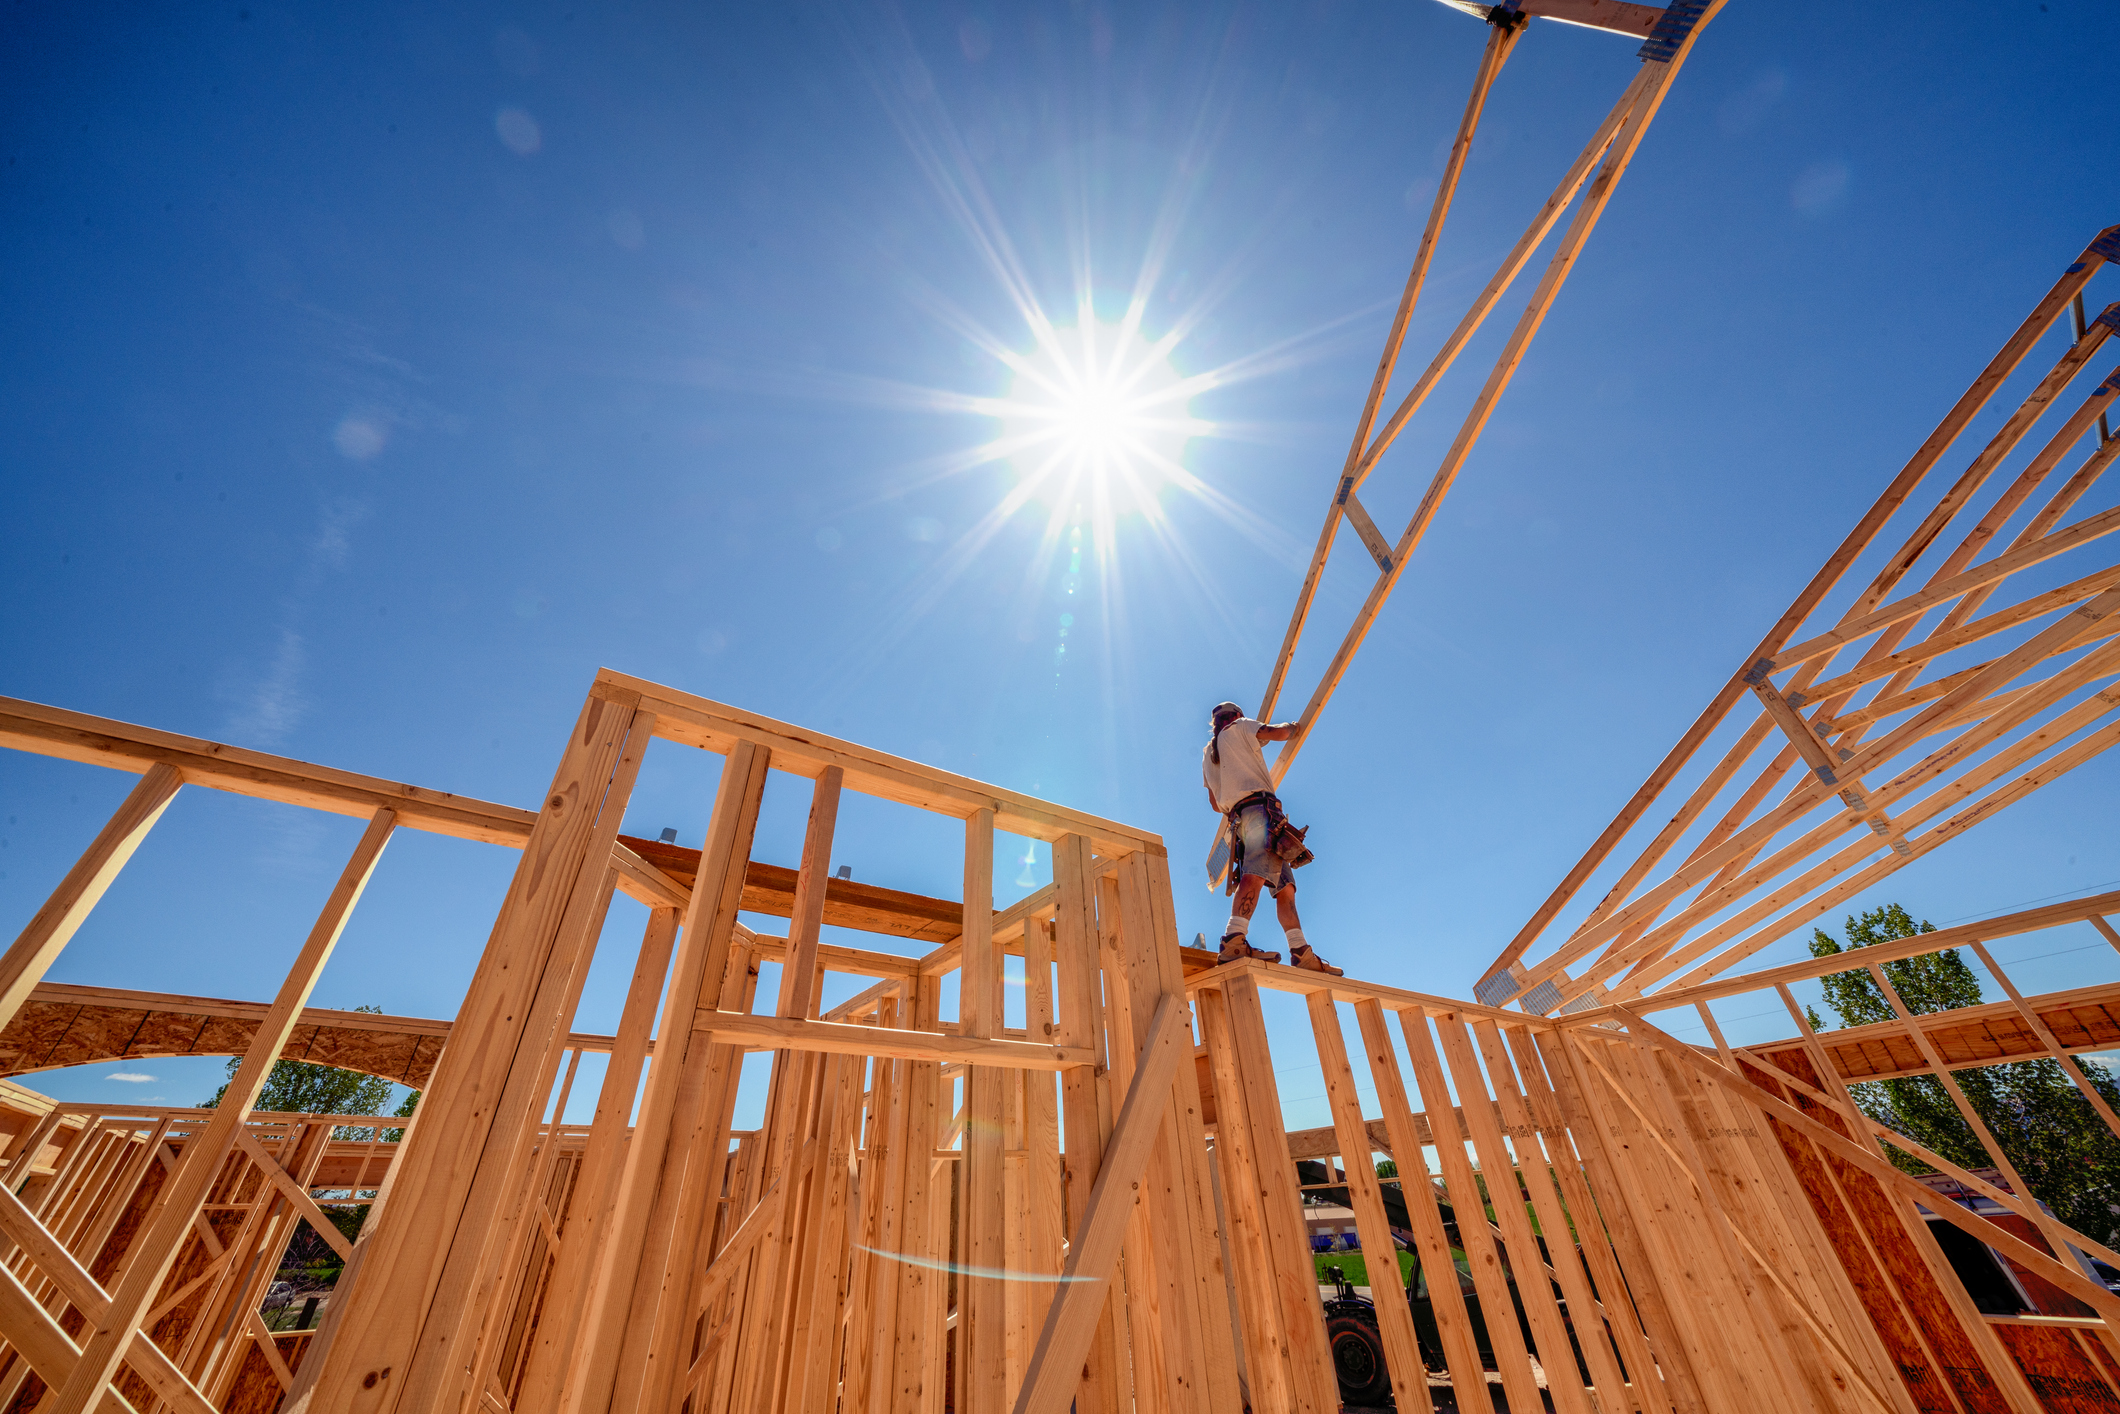 An image of a housing construction site with a man working under a blue sky 